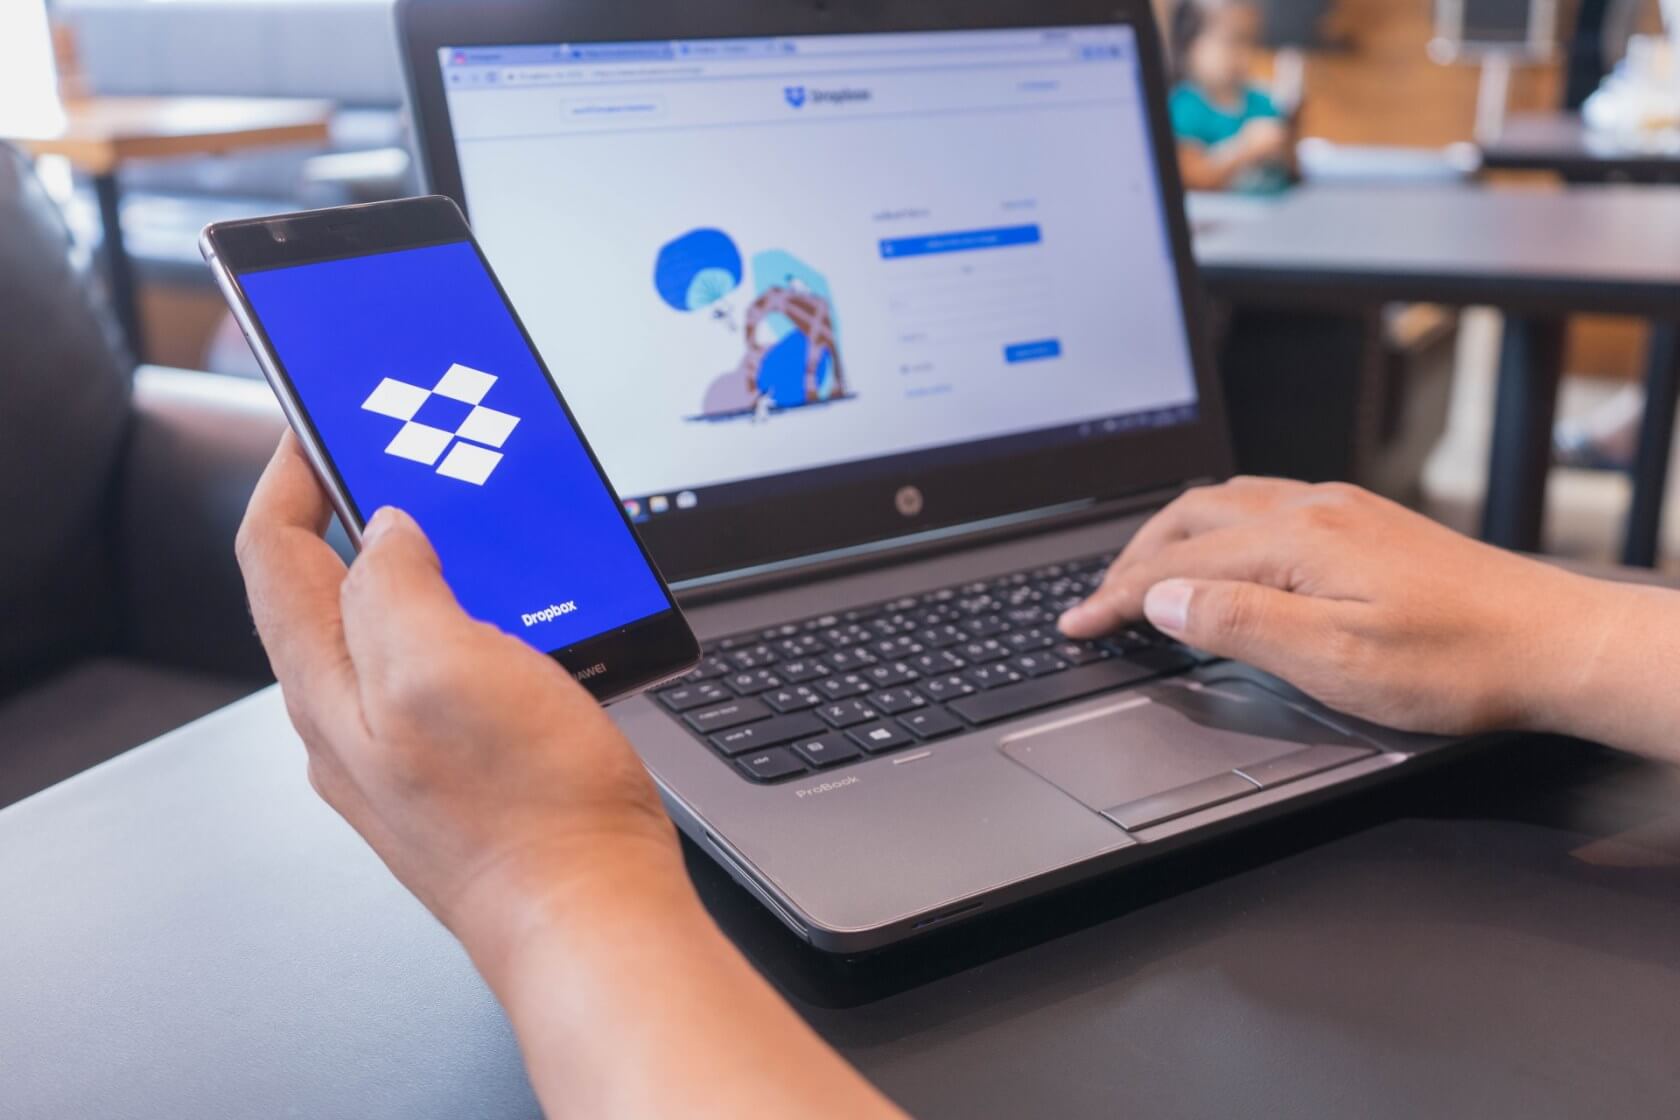 Dropbox releases an invite-only password management app